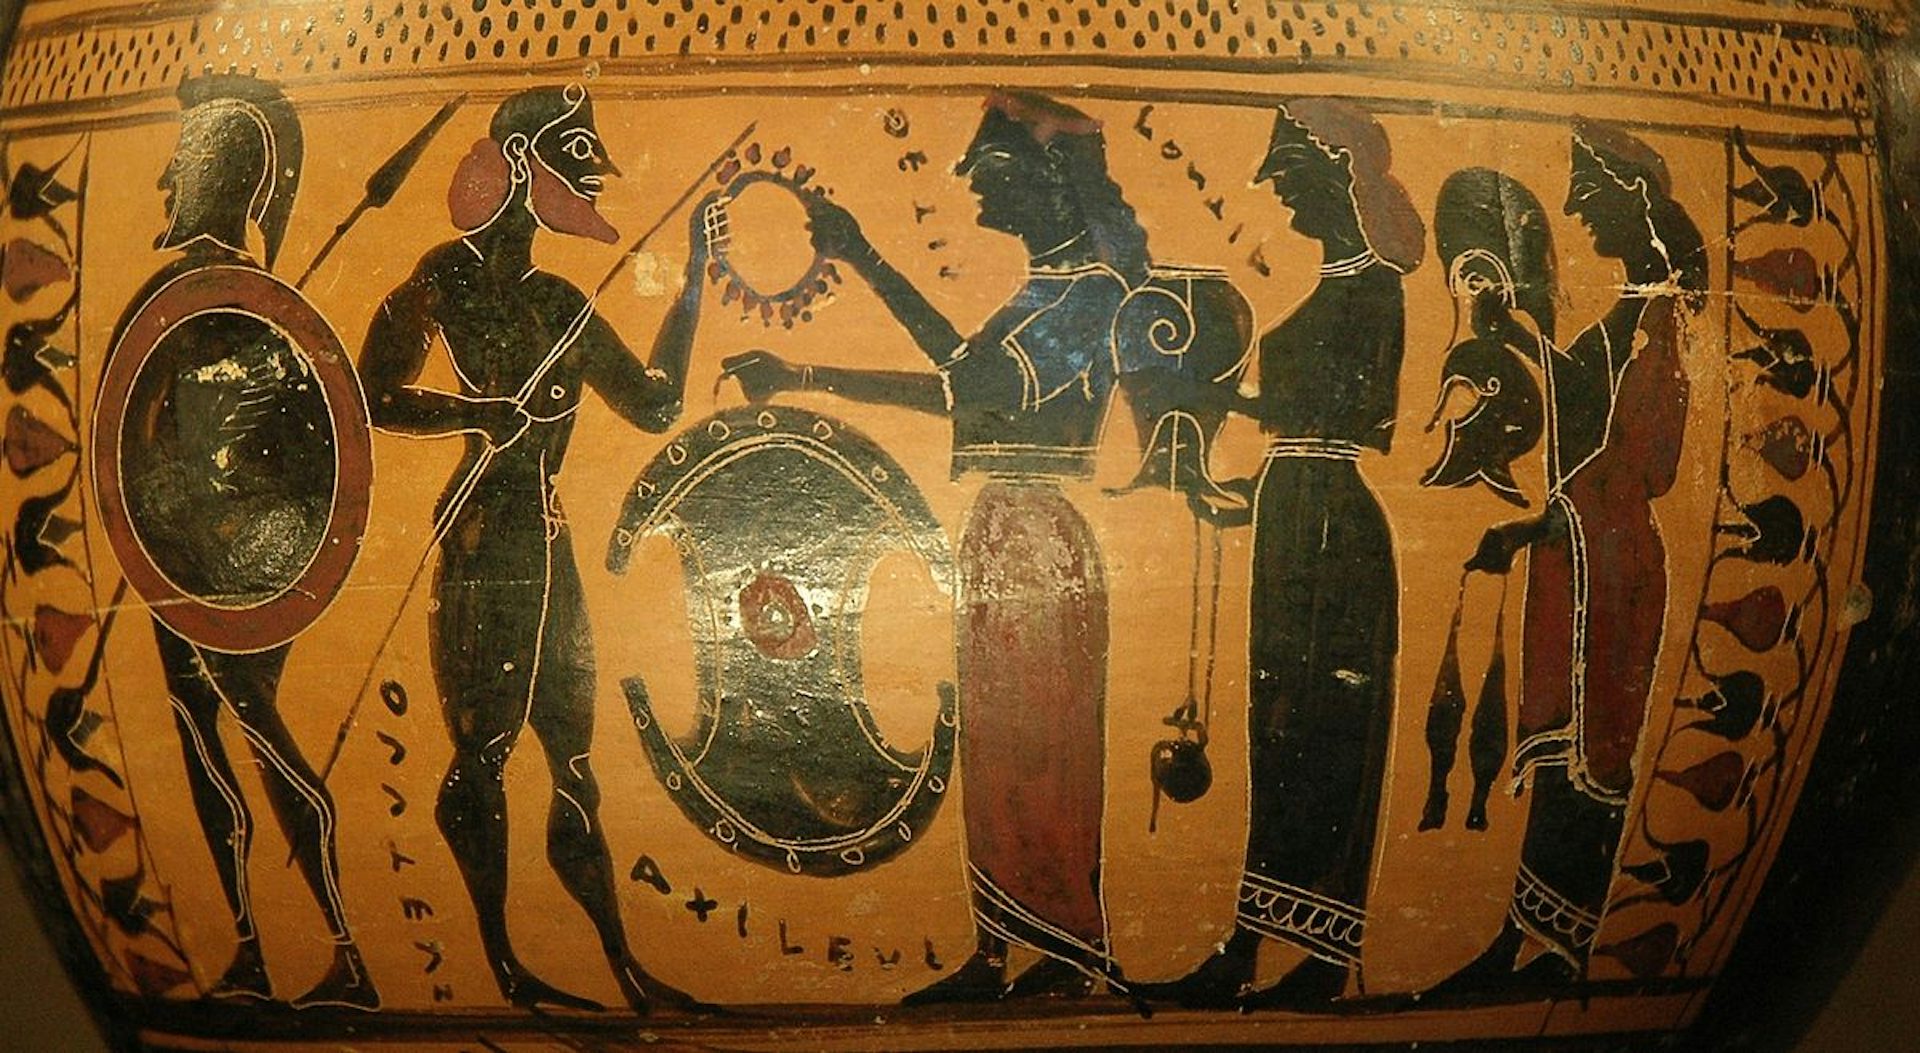 Vase painting of Thetis and her attendants presenting Achilles with armor